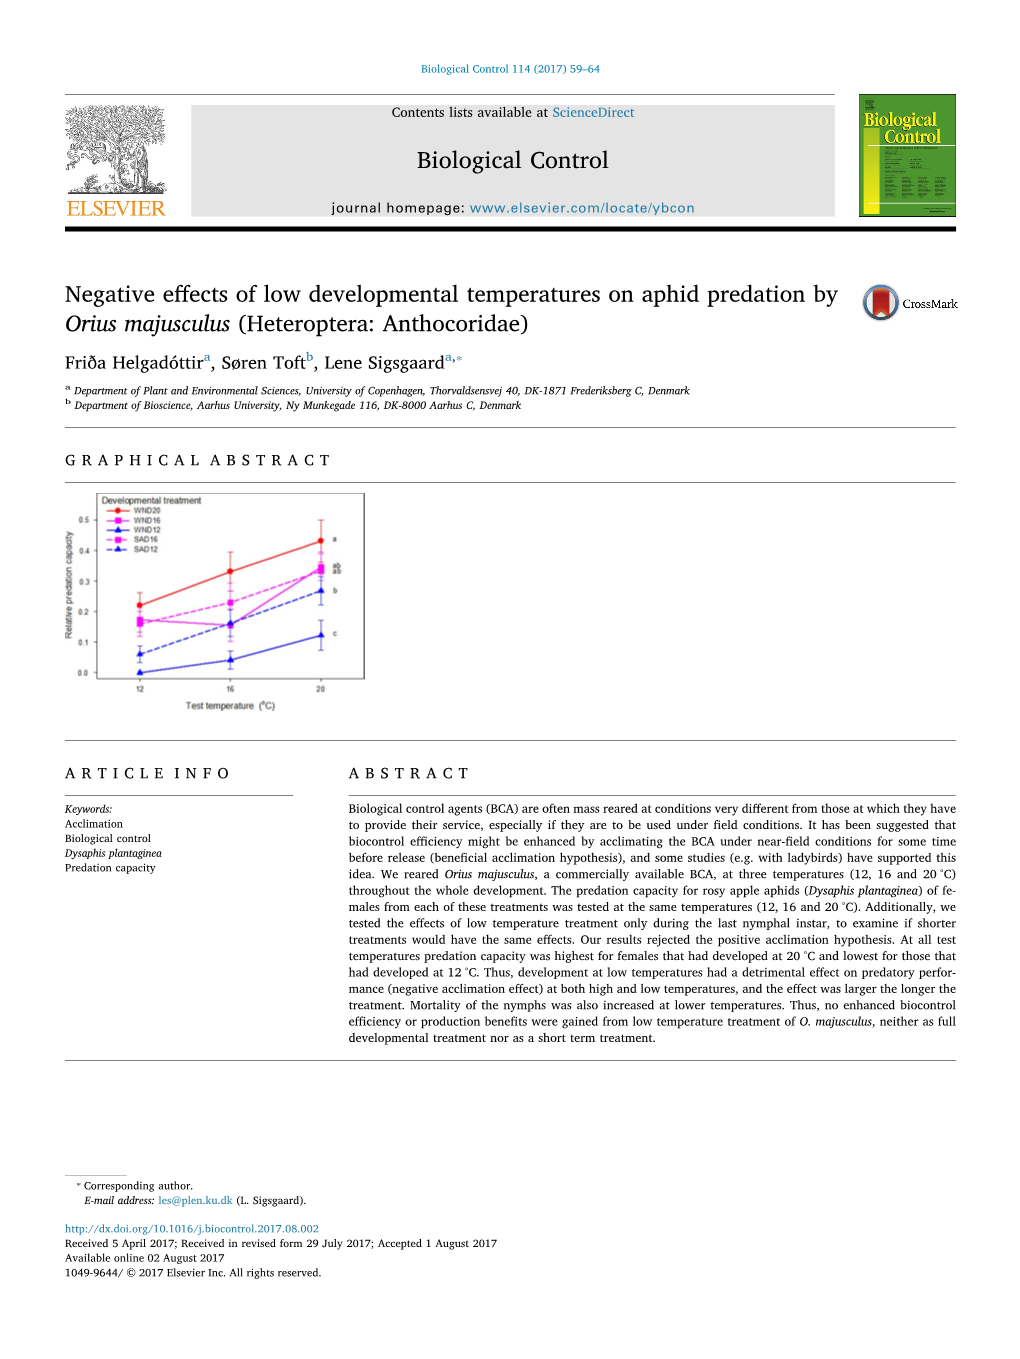 Negative Effects of Low Developmental Temperatures on Aphid Predation By